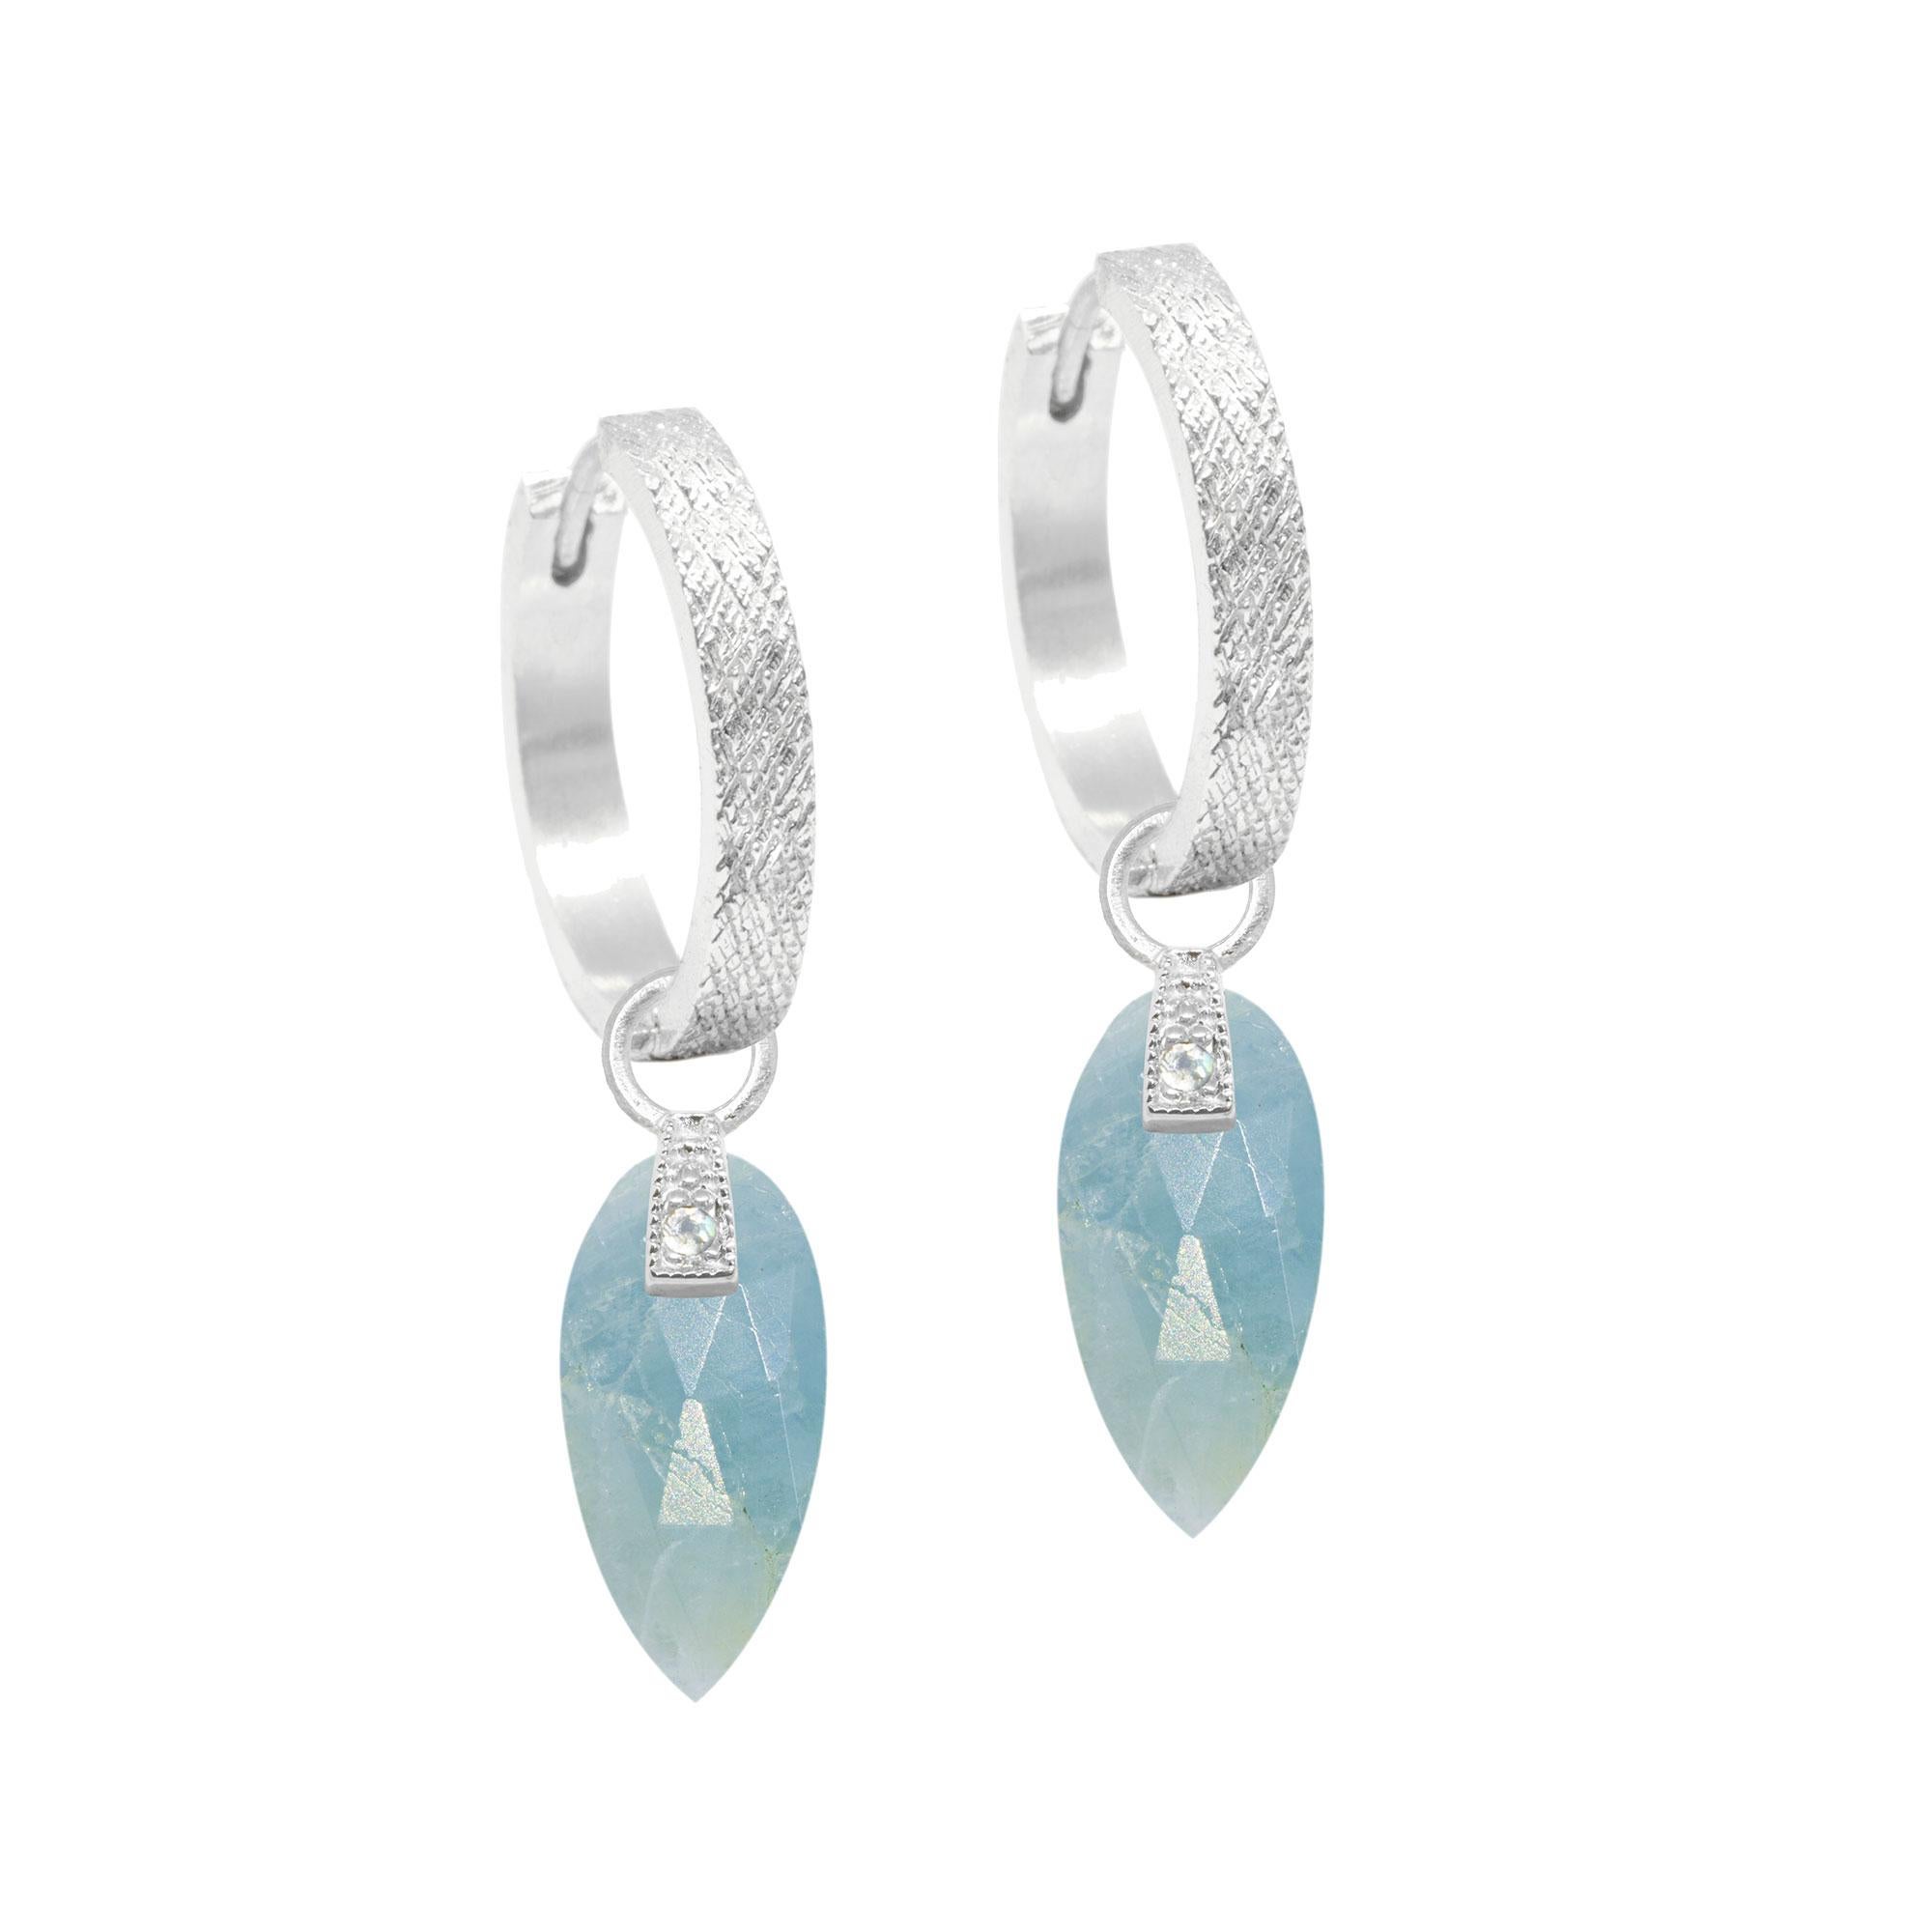 The perfect everyday style, especially when you want a pop of pale blue, the Angel Wings 15mm Silver Charms feature milky aquamarine drops dangling from a gemstone-studded bale.


Nina Wynn Design's patent-pending earrings have an element on the